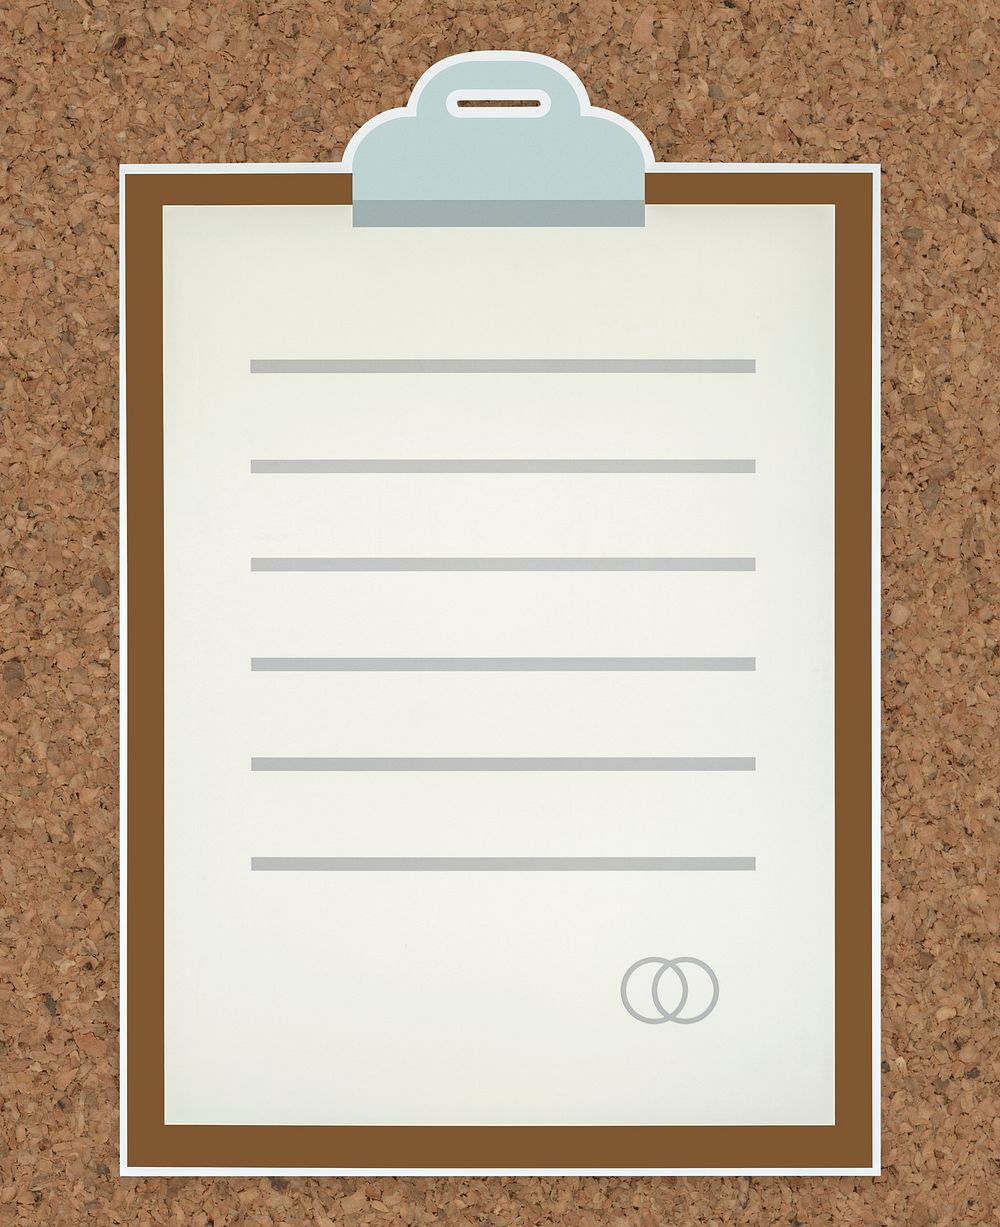 Business document paper icon isolated